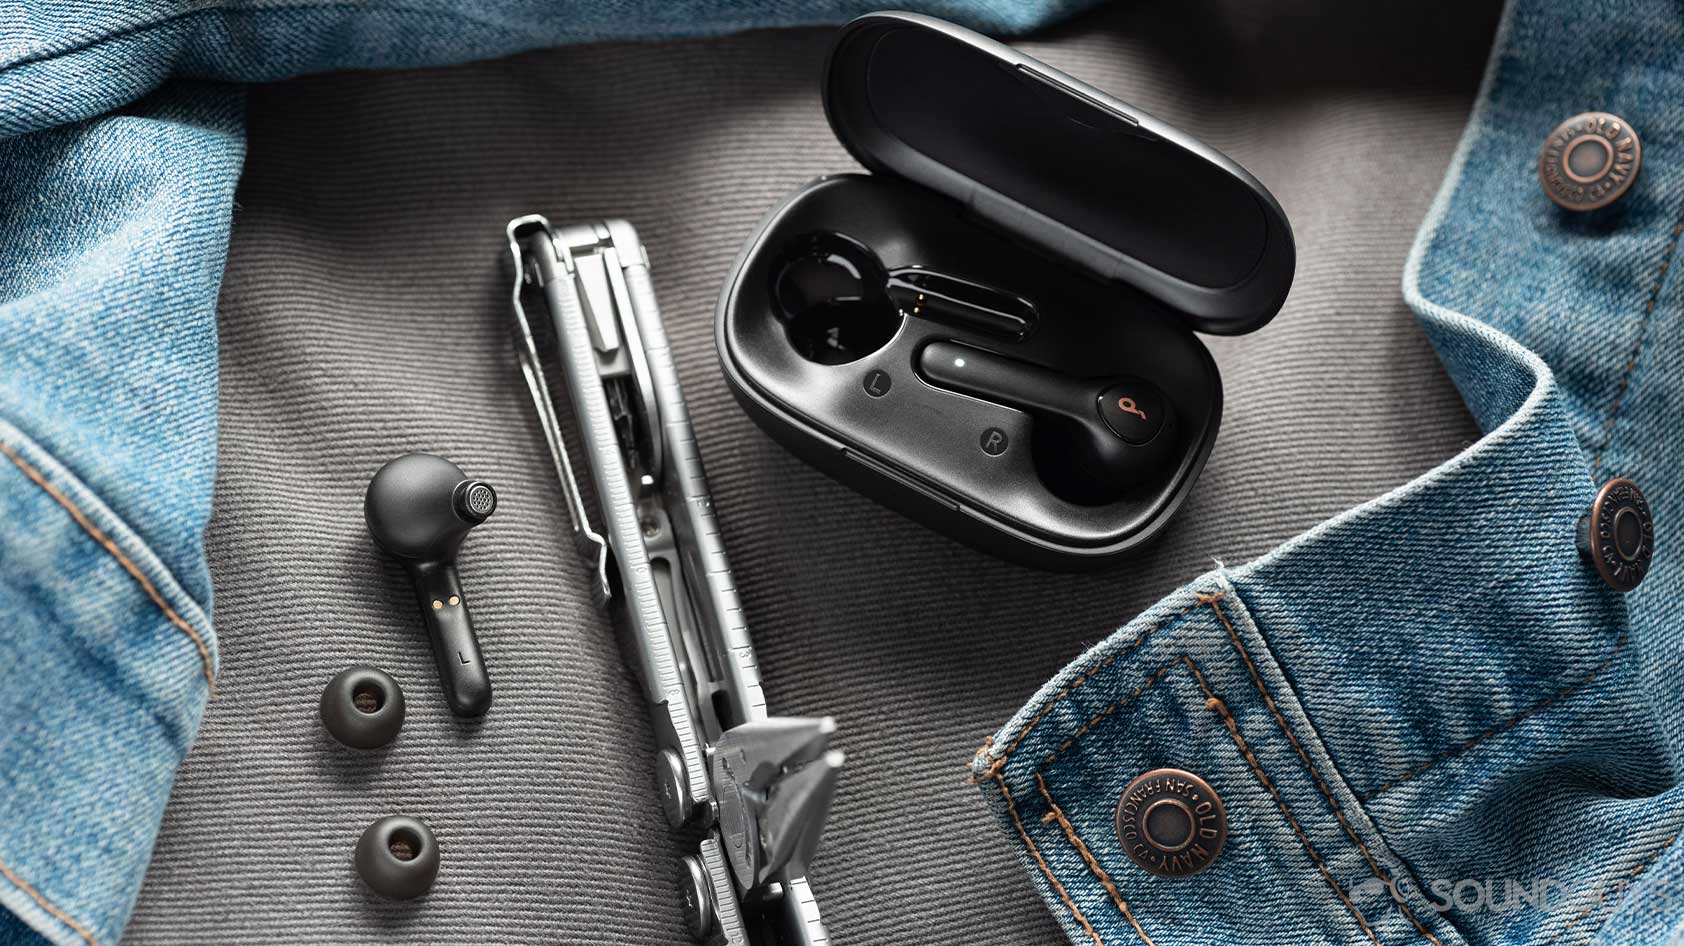 A picture of the Anker Soundcore Life P2 true wireless earbuds, ear tips, and case next to a Leatherman multitool and denim jacket.